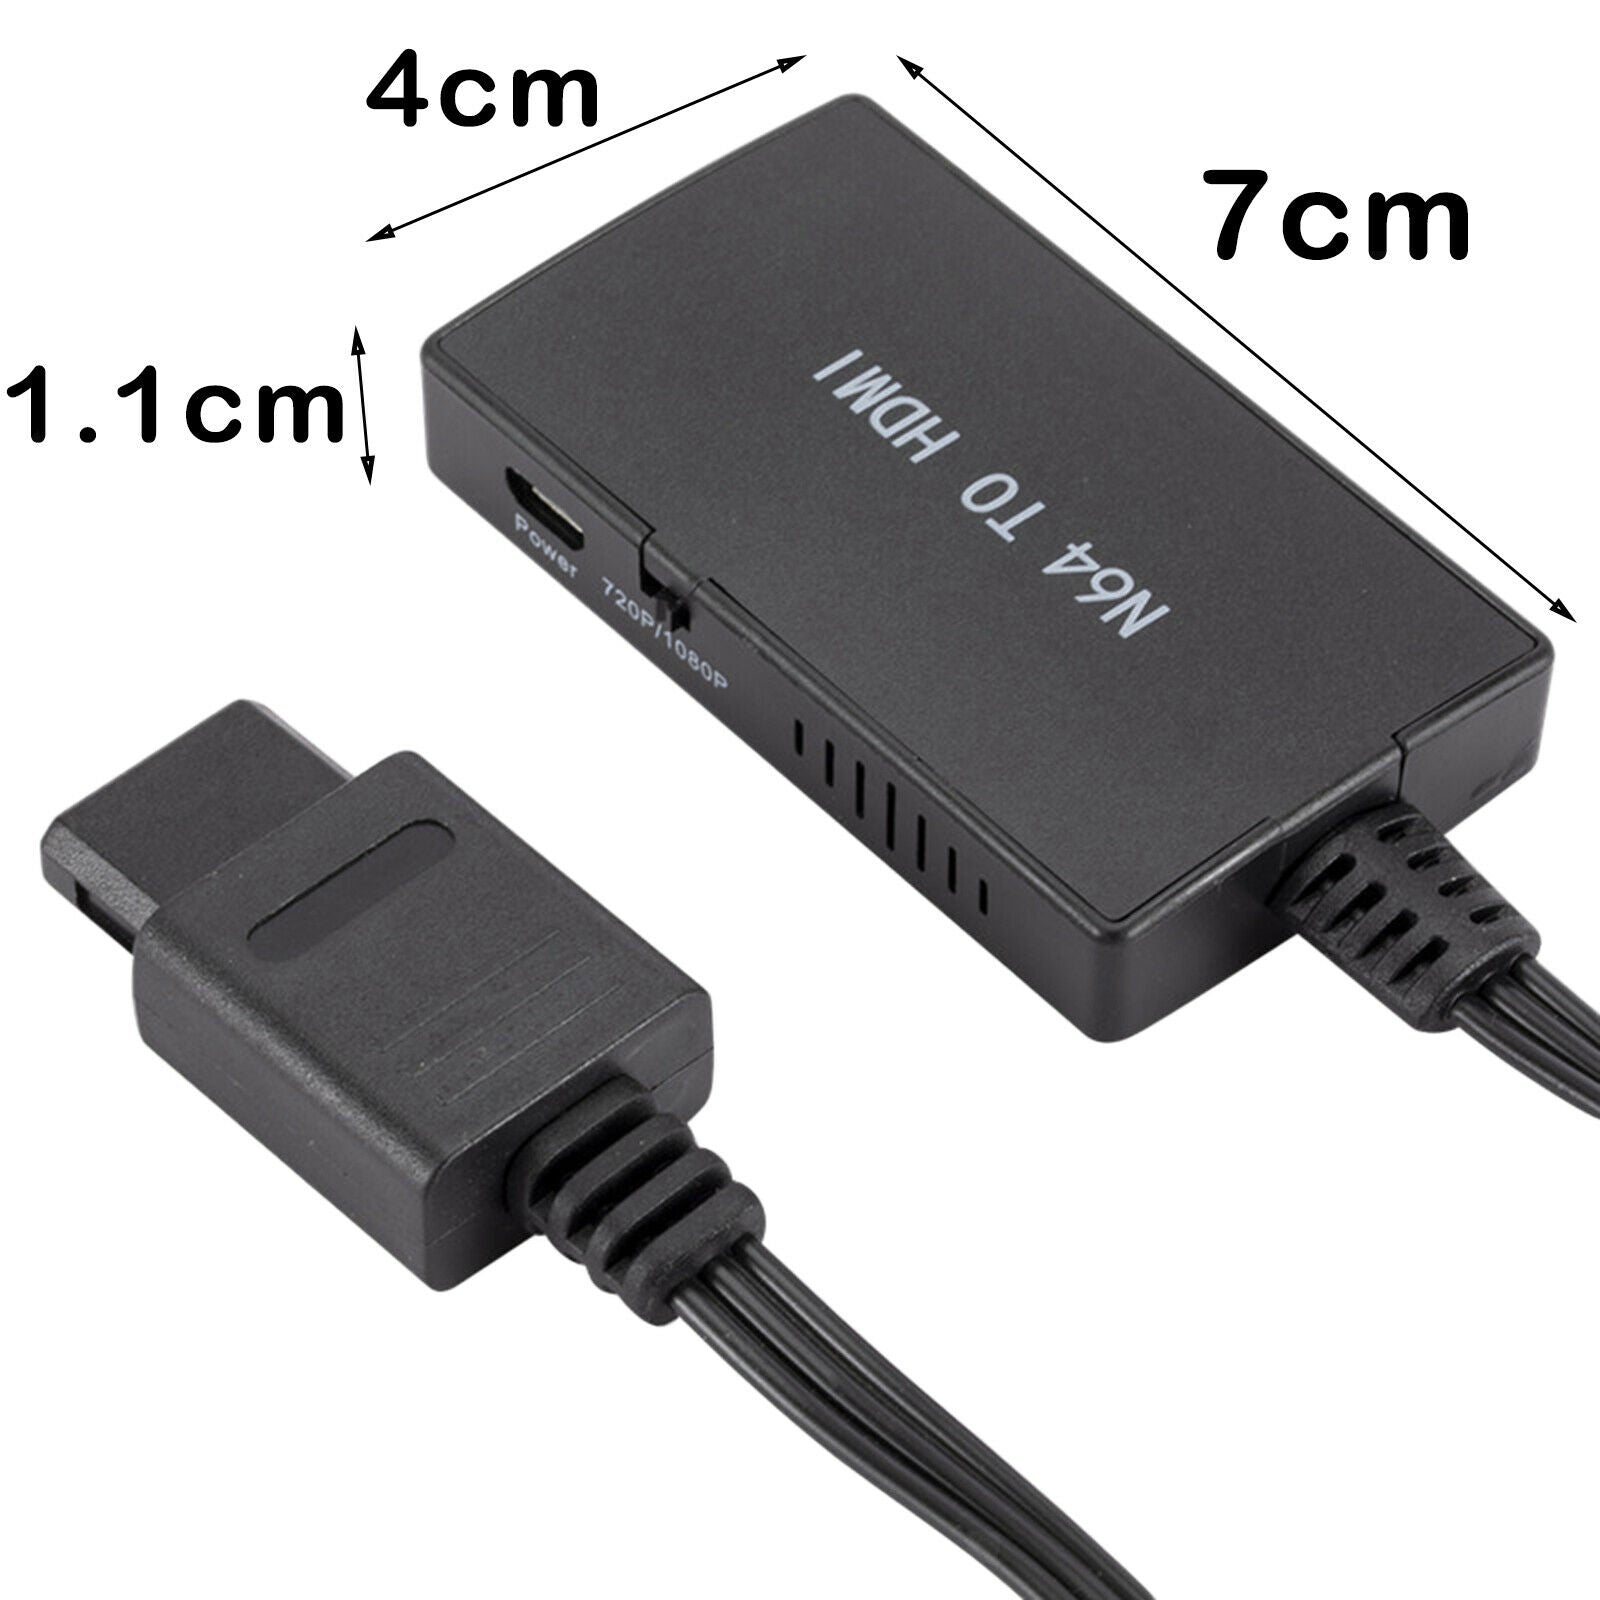 1 Set N64 To HDMI Converter HD Link Cable Parts Tools for N64 Consoles